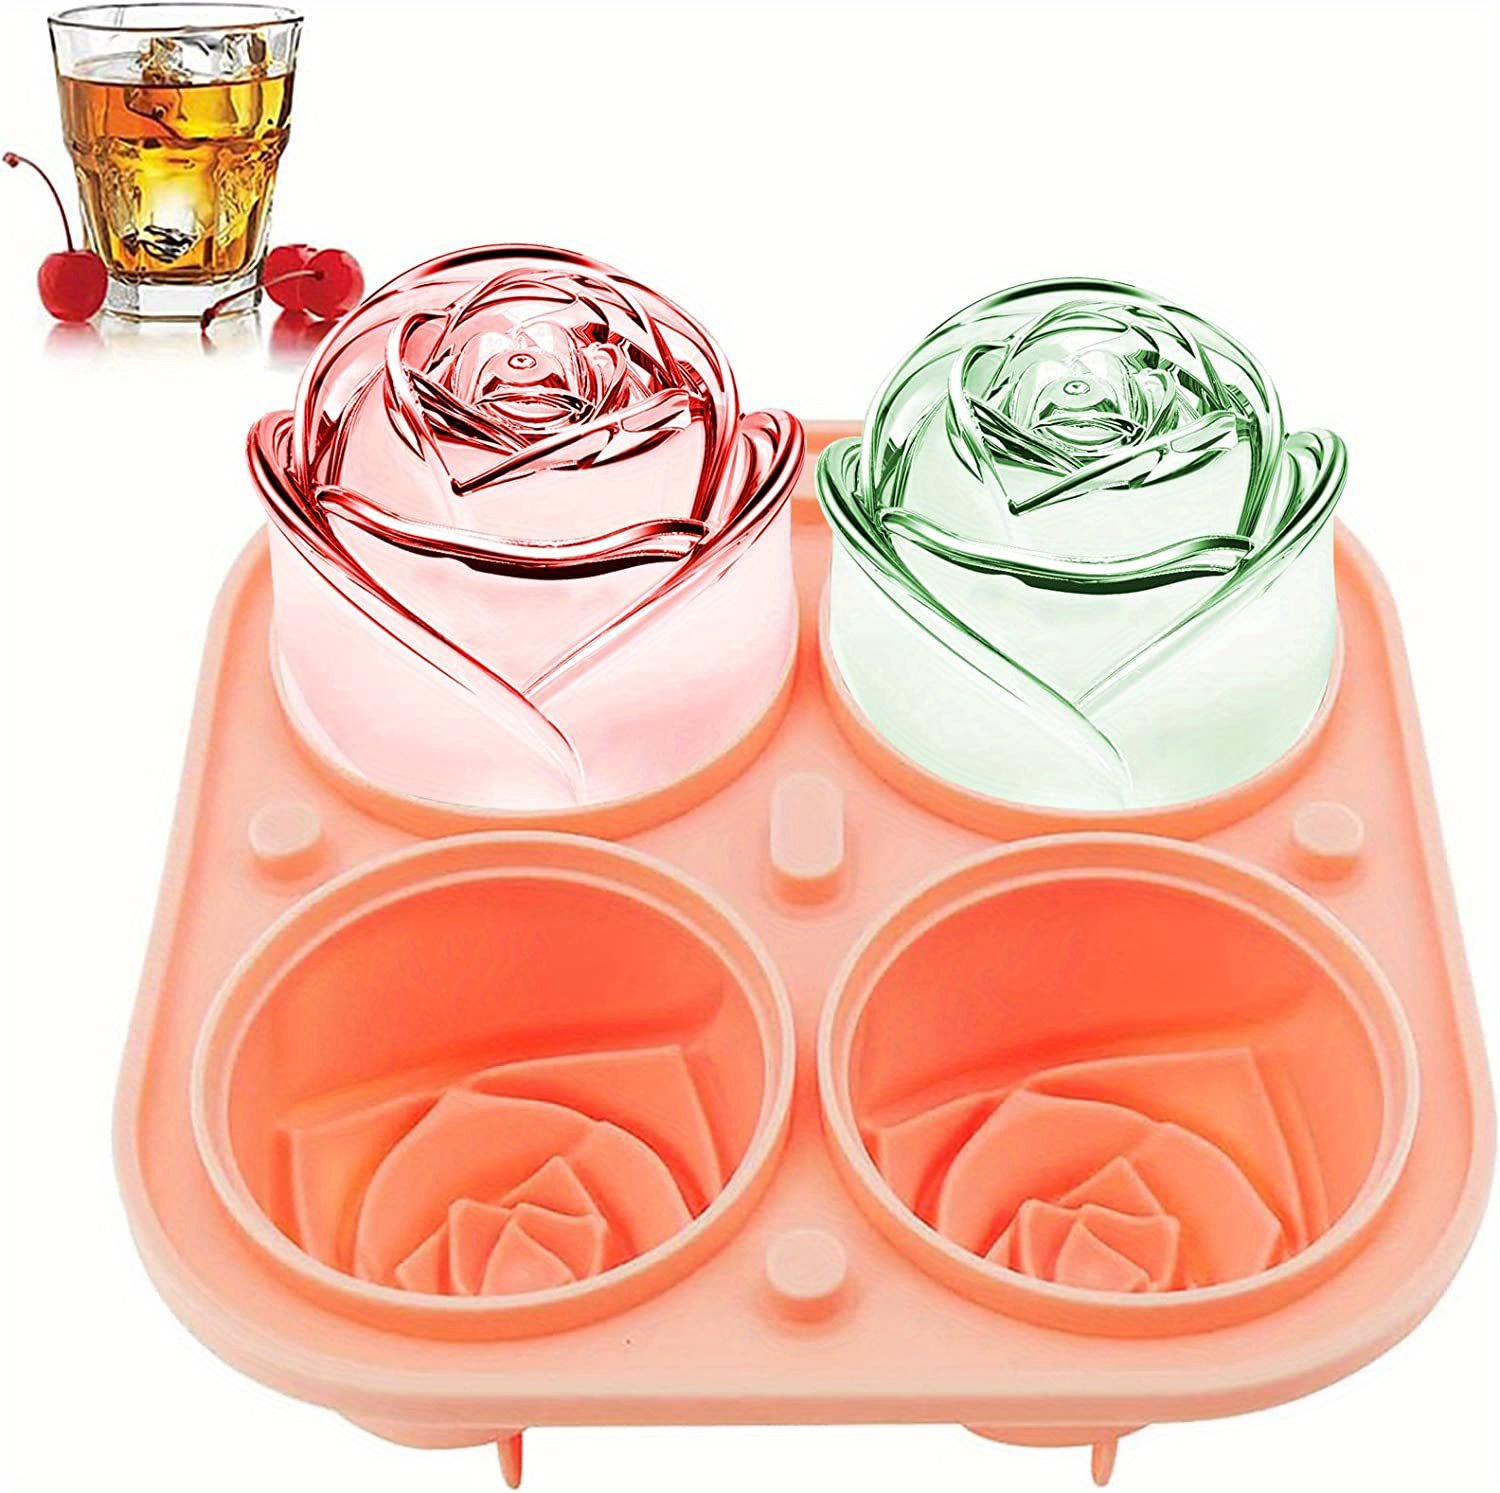 1pc mold ice cube mold 3d rose ice molds 2 5 inch ice cube tray large ice cube trays for bar cocktail party make 4 giant cute flower shape ice cube mold silicone fun big ice ball maker mold kitchen accessaries details 0